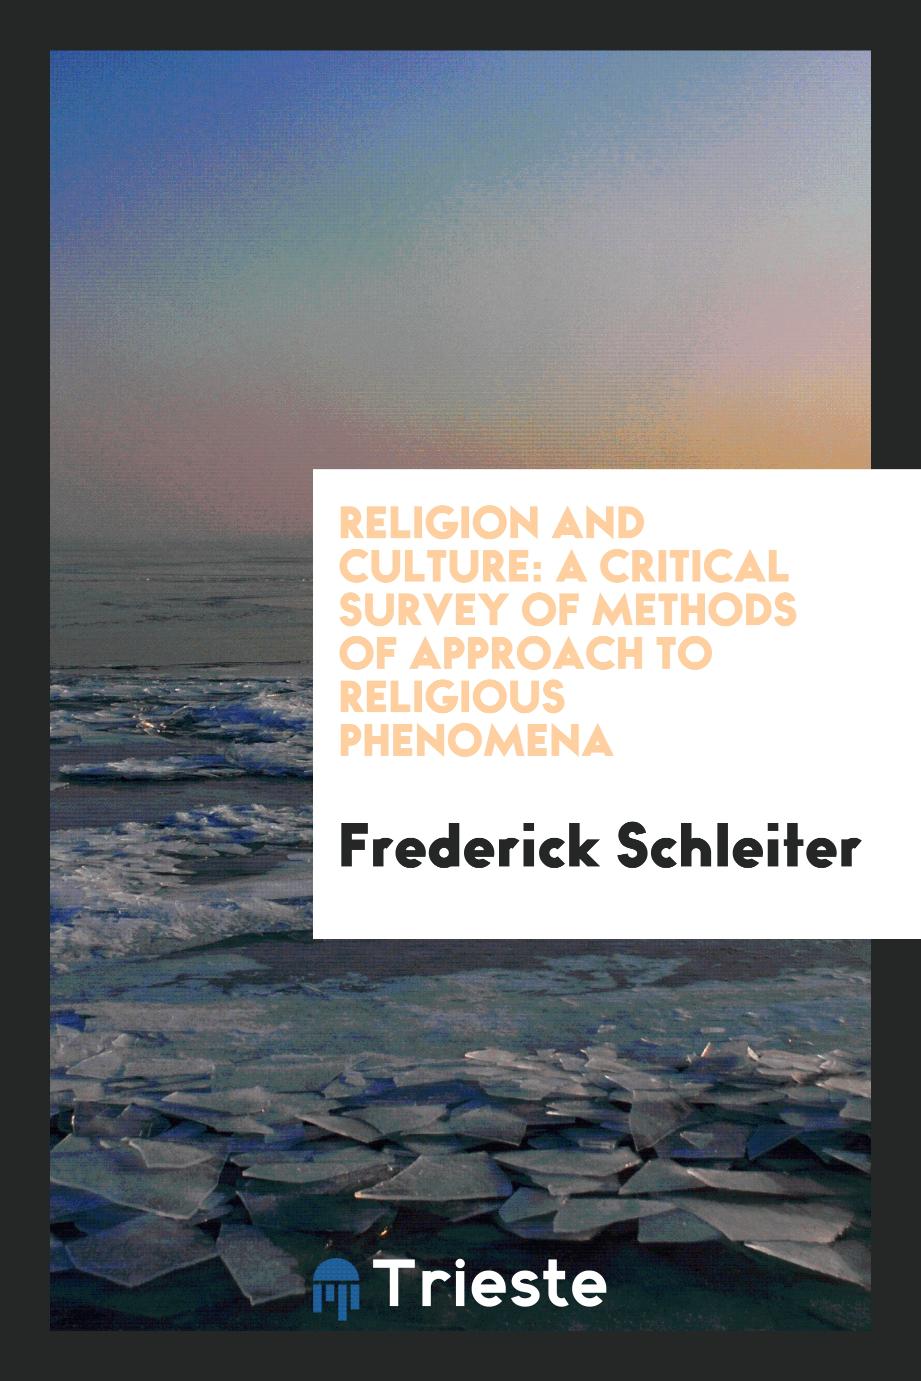 Religion and Culture: A Critical Survey of Methods of Approach to Religious Phenomena